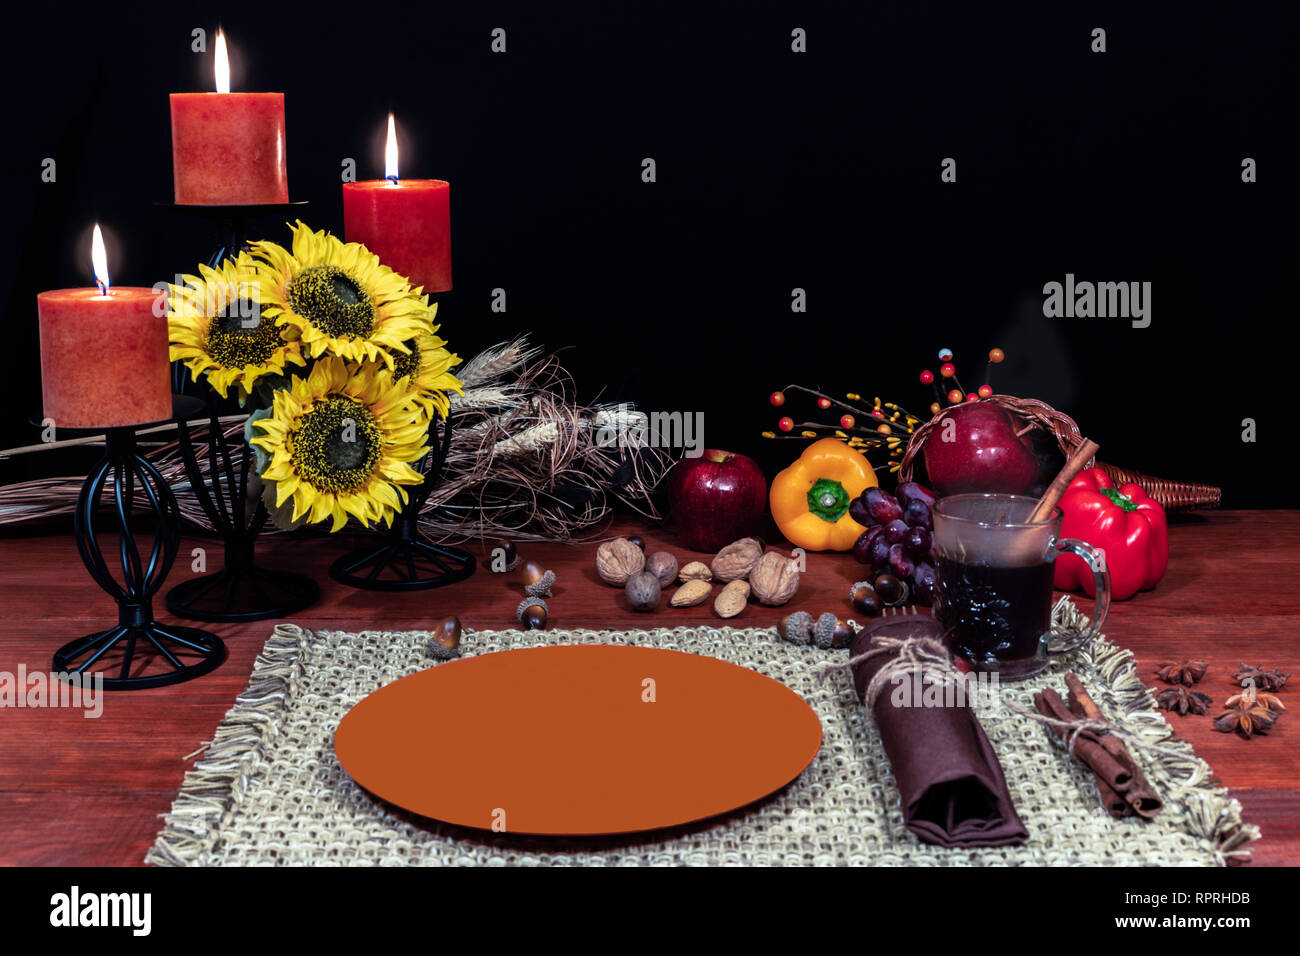 Thanksgiving setting for one with candle light, fruit, vegetables, hot tea, and sunflowers with cinnamon sticks and anise. Stock Photo